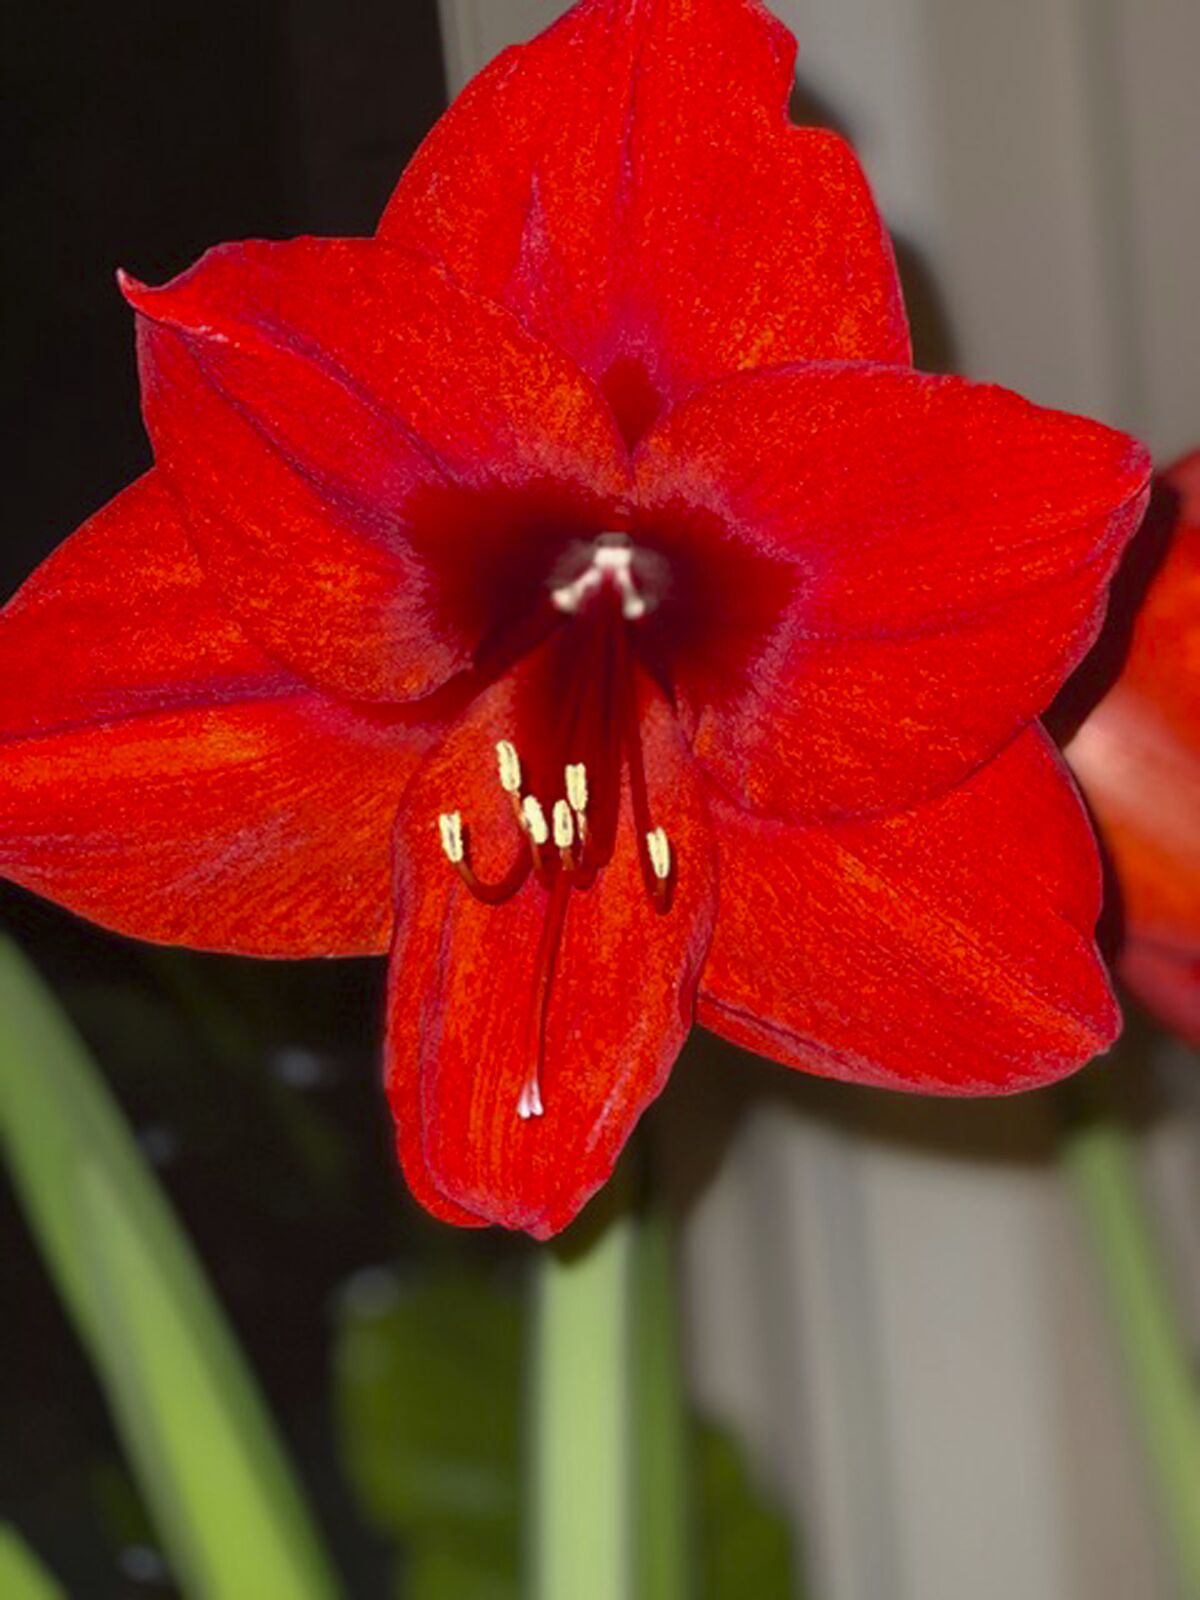 This image provided by Jeff Lowenfels shows an Amaryllis bulb in bloom on Saturday, Jan. 22, 2022, in Anchorage, Alaska. (Jeff Lowenfels via AP)